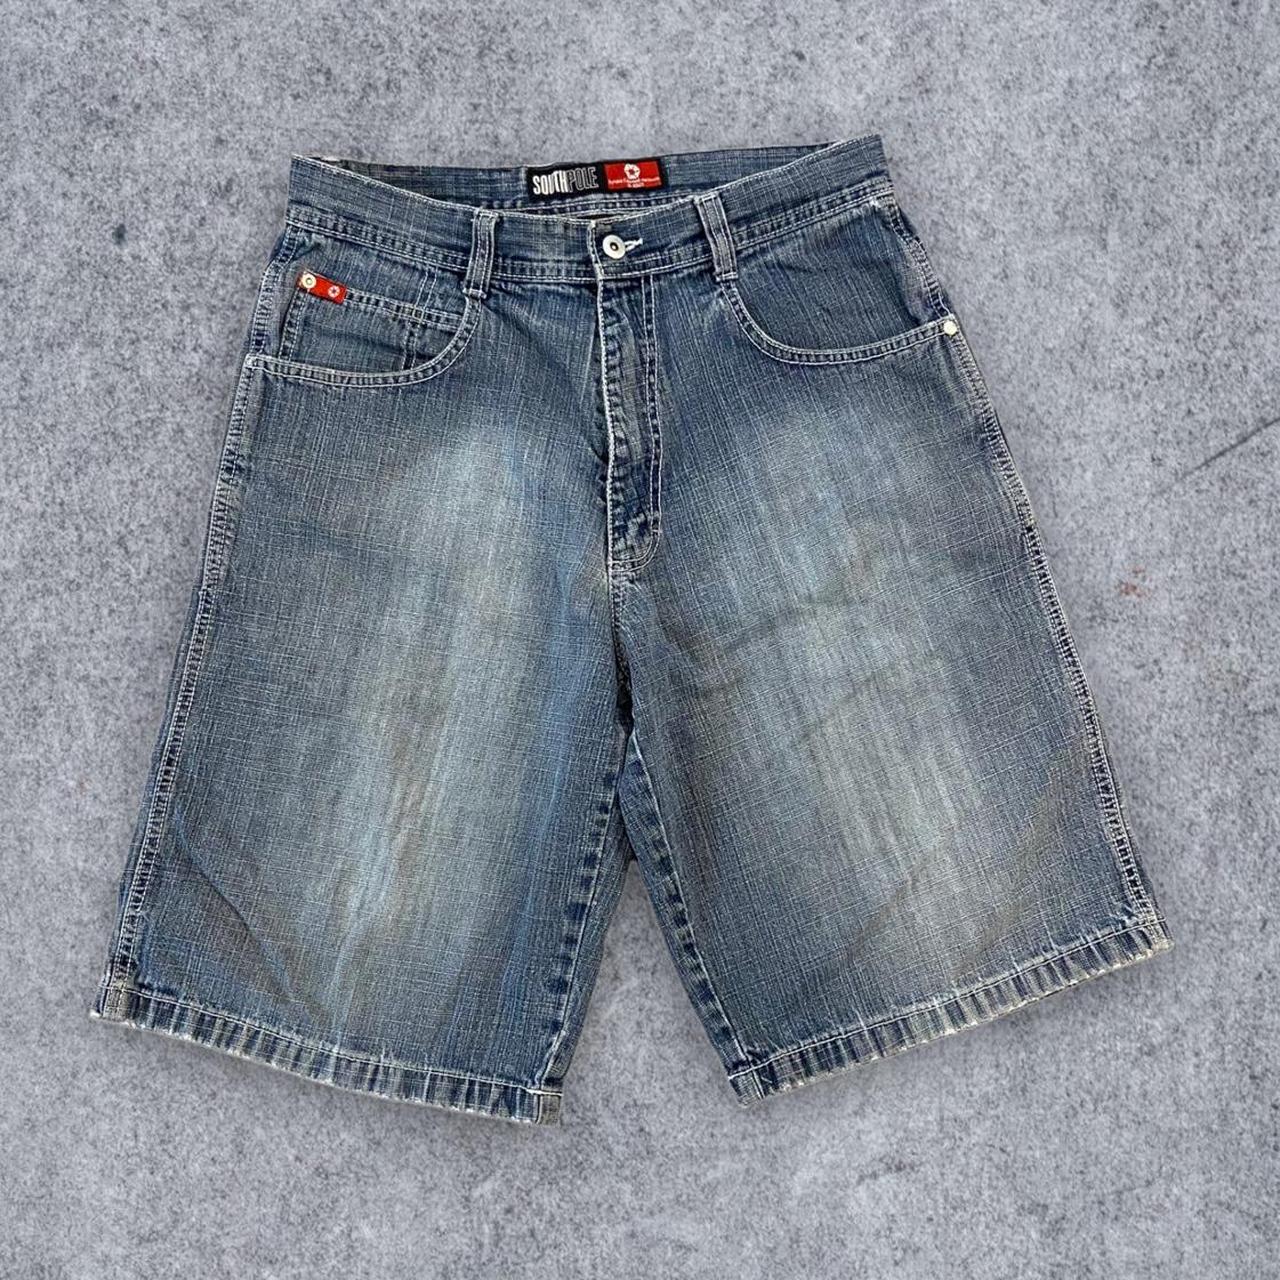 classic essential south pole jorts. these gotta be... - Depop